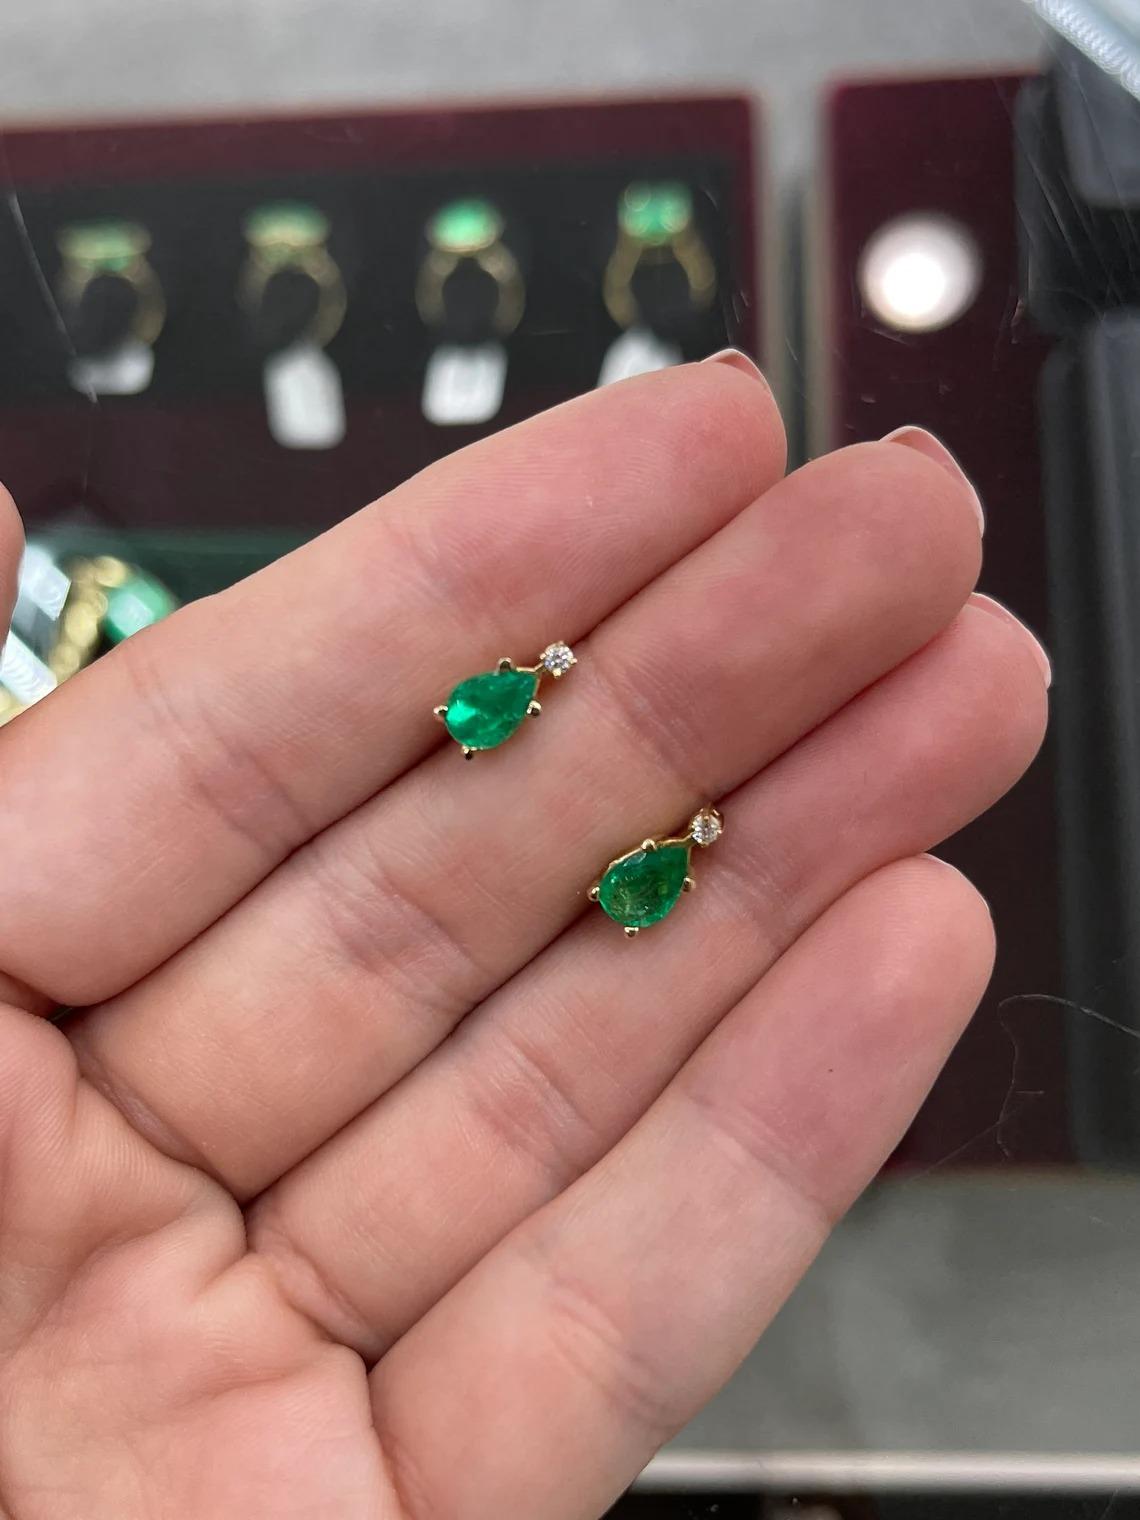 Elegance defined! These teardrop emerald and diamond earrings are fashioned in solid 14k yellow gold. These studs feature genuine Colombian emeralds accented with natural white diamonds. The emeralds have a combined 1.38 total carat weight and a